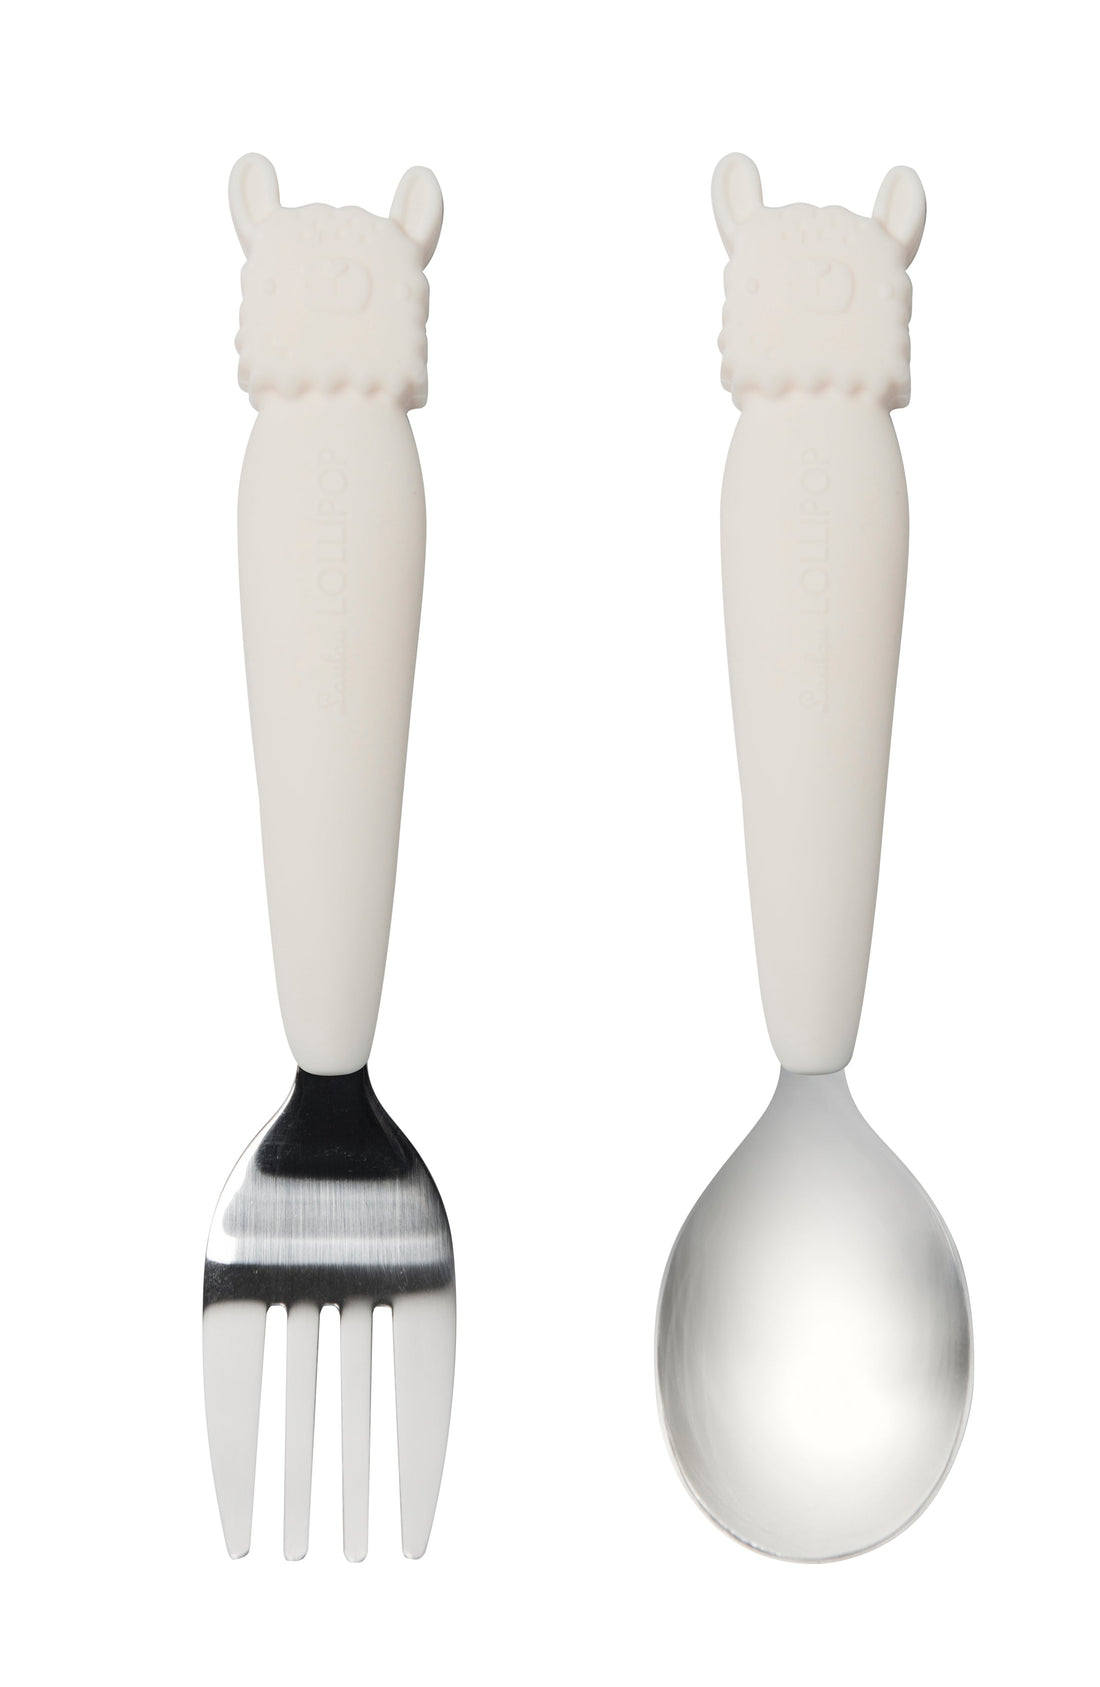 Born To Be Wild Kids spoon and fork set Eat Loulou Lollipop Llama 